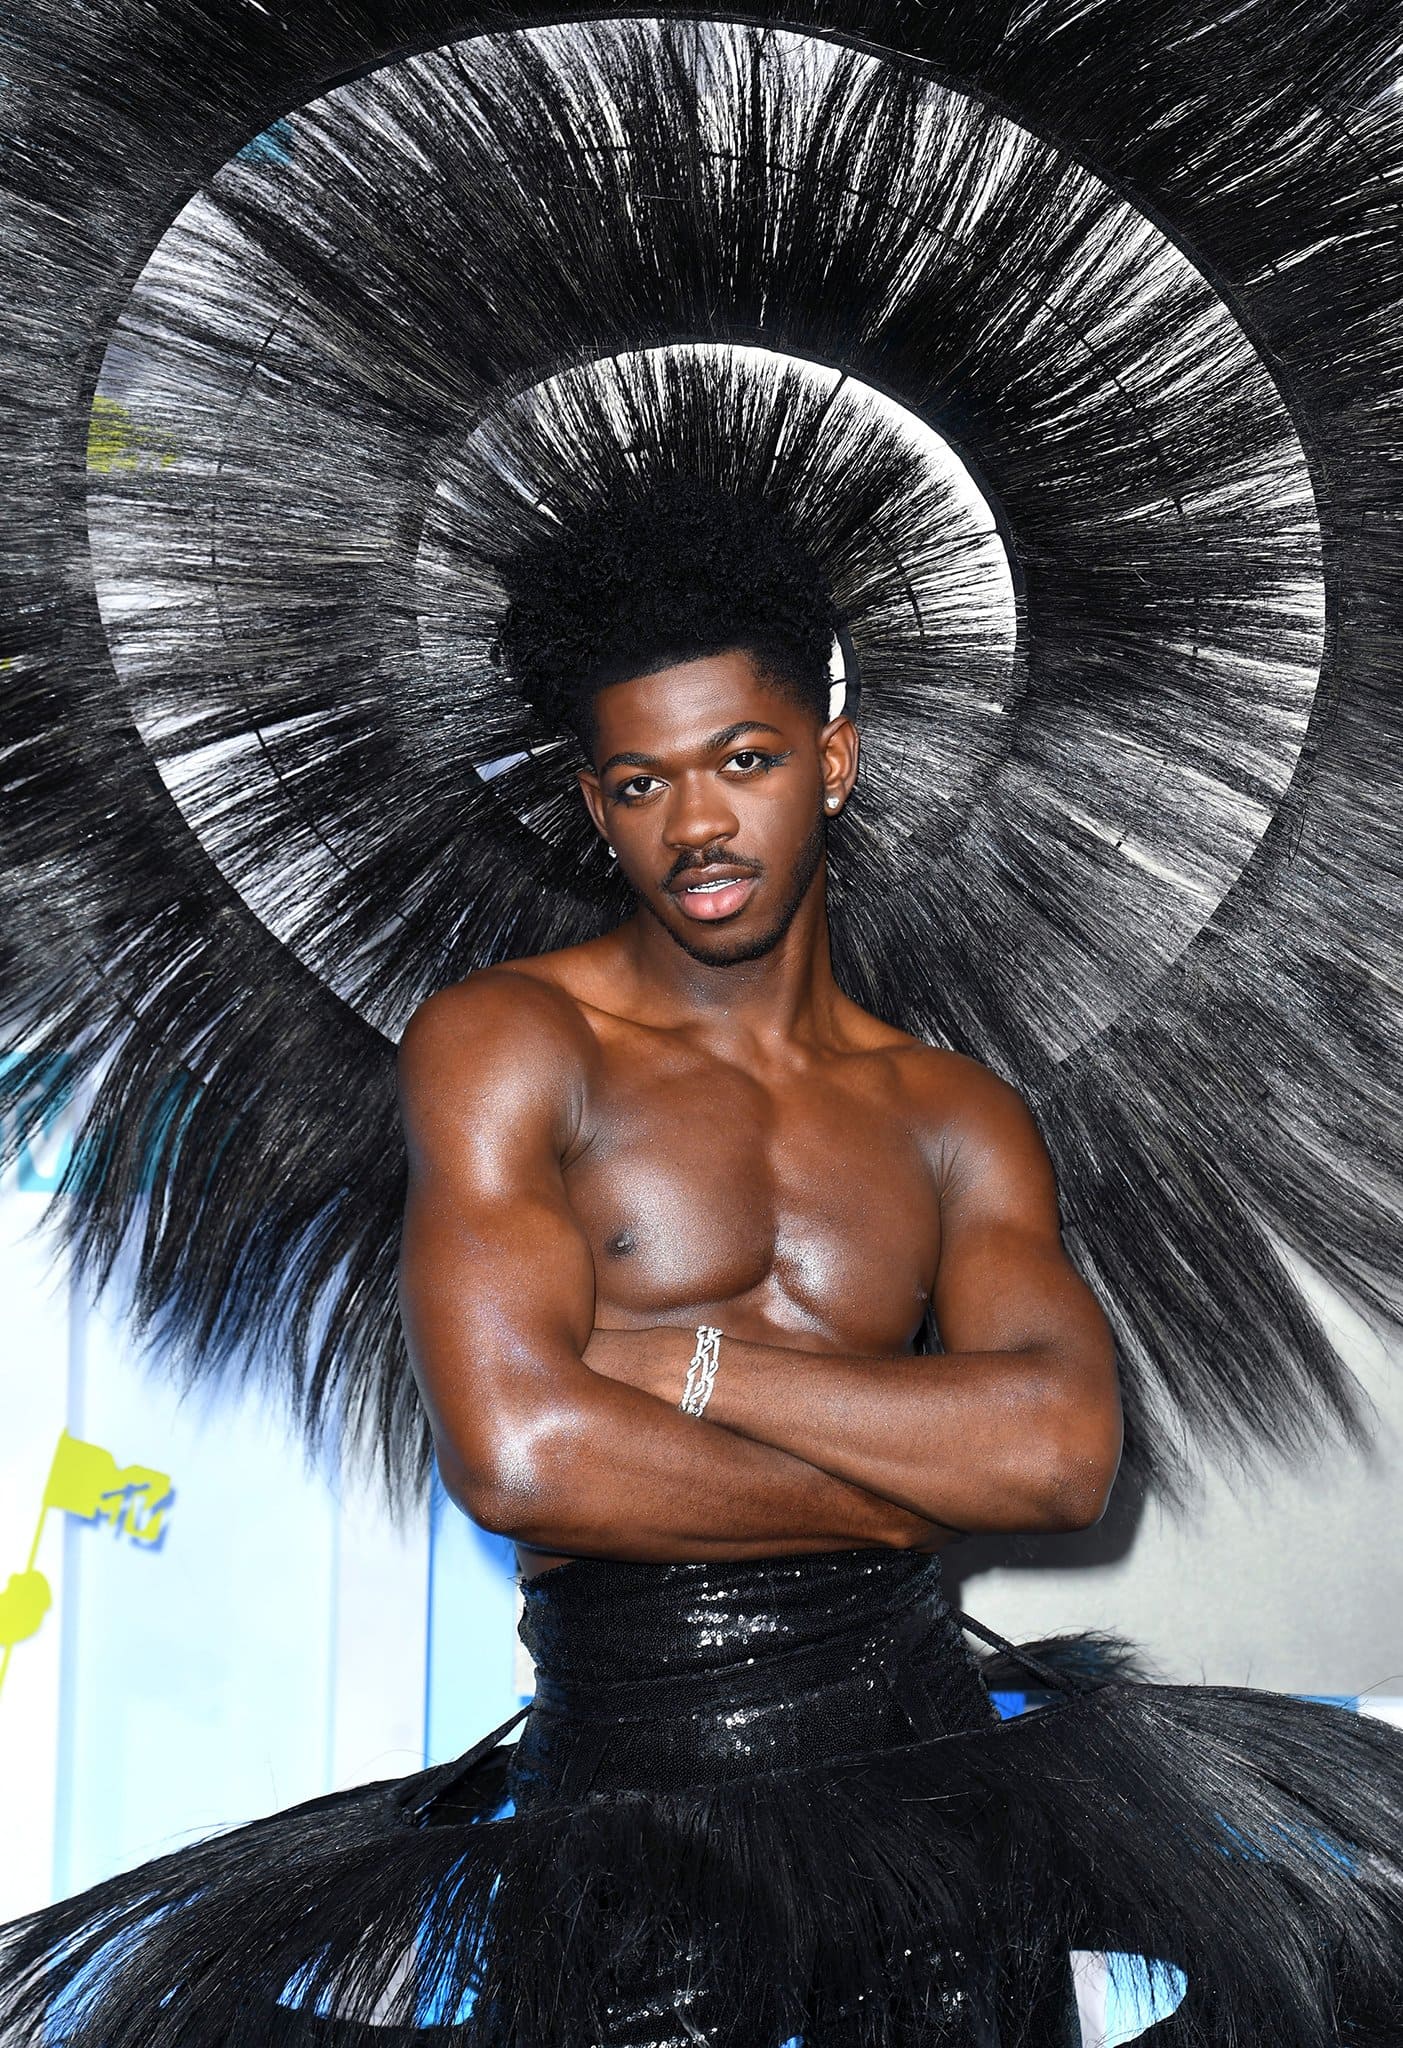 Lil Nas X styles his sculptural skirt with a matching feathered headpiece and De Beers diamond jewelry